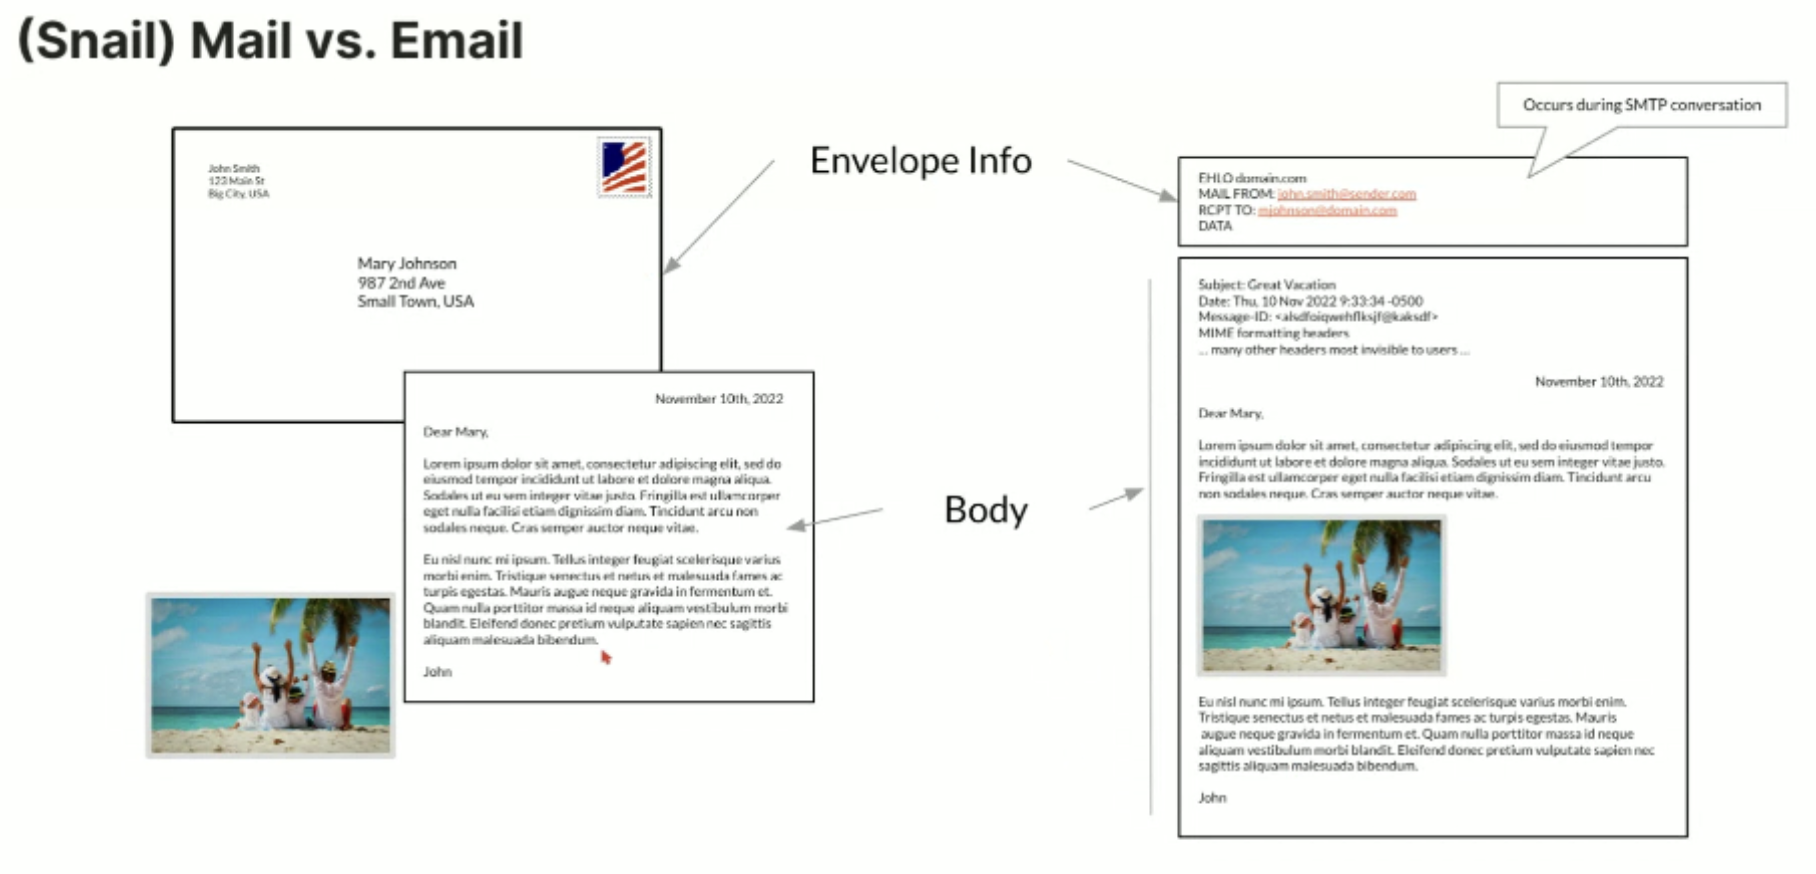 Comparison between snail mail and email